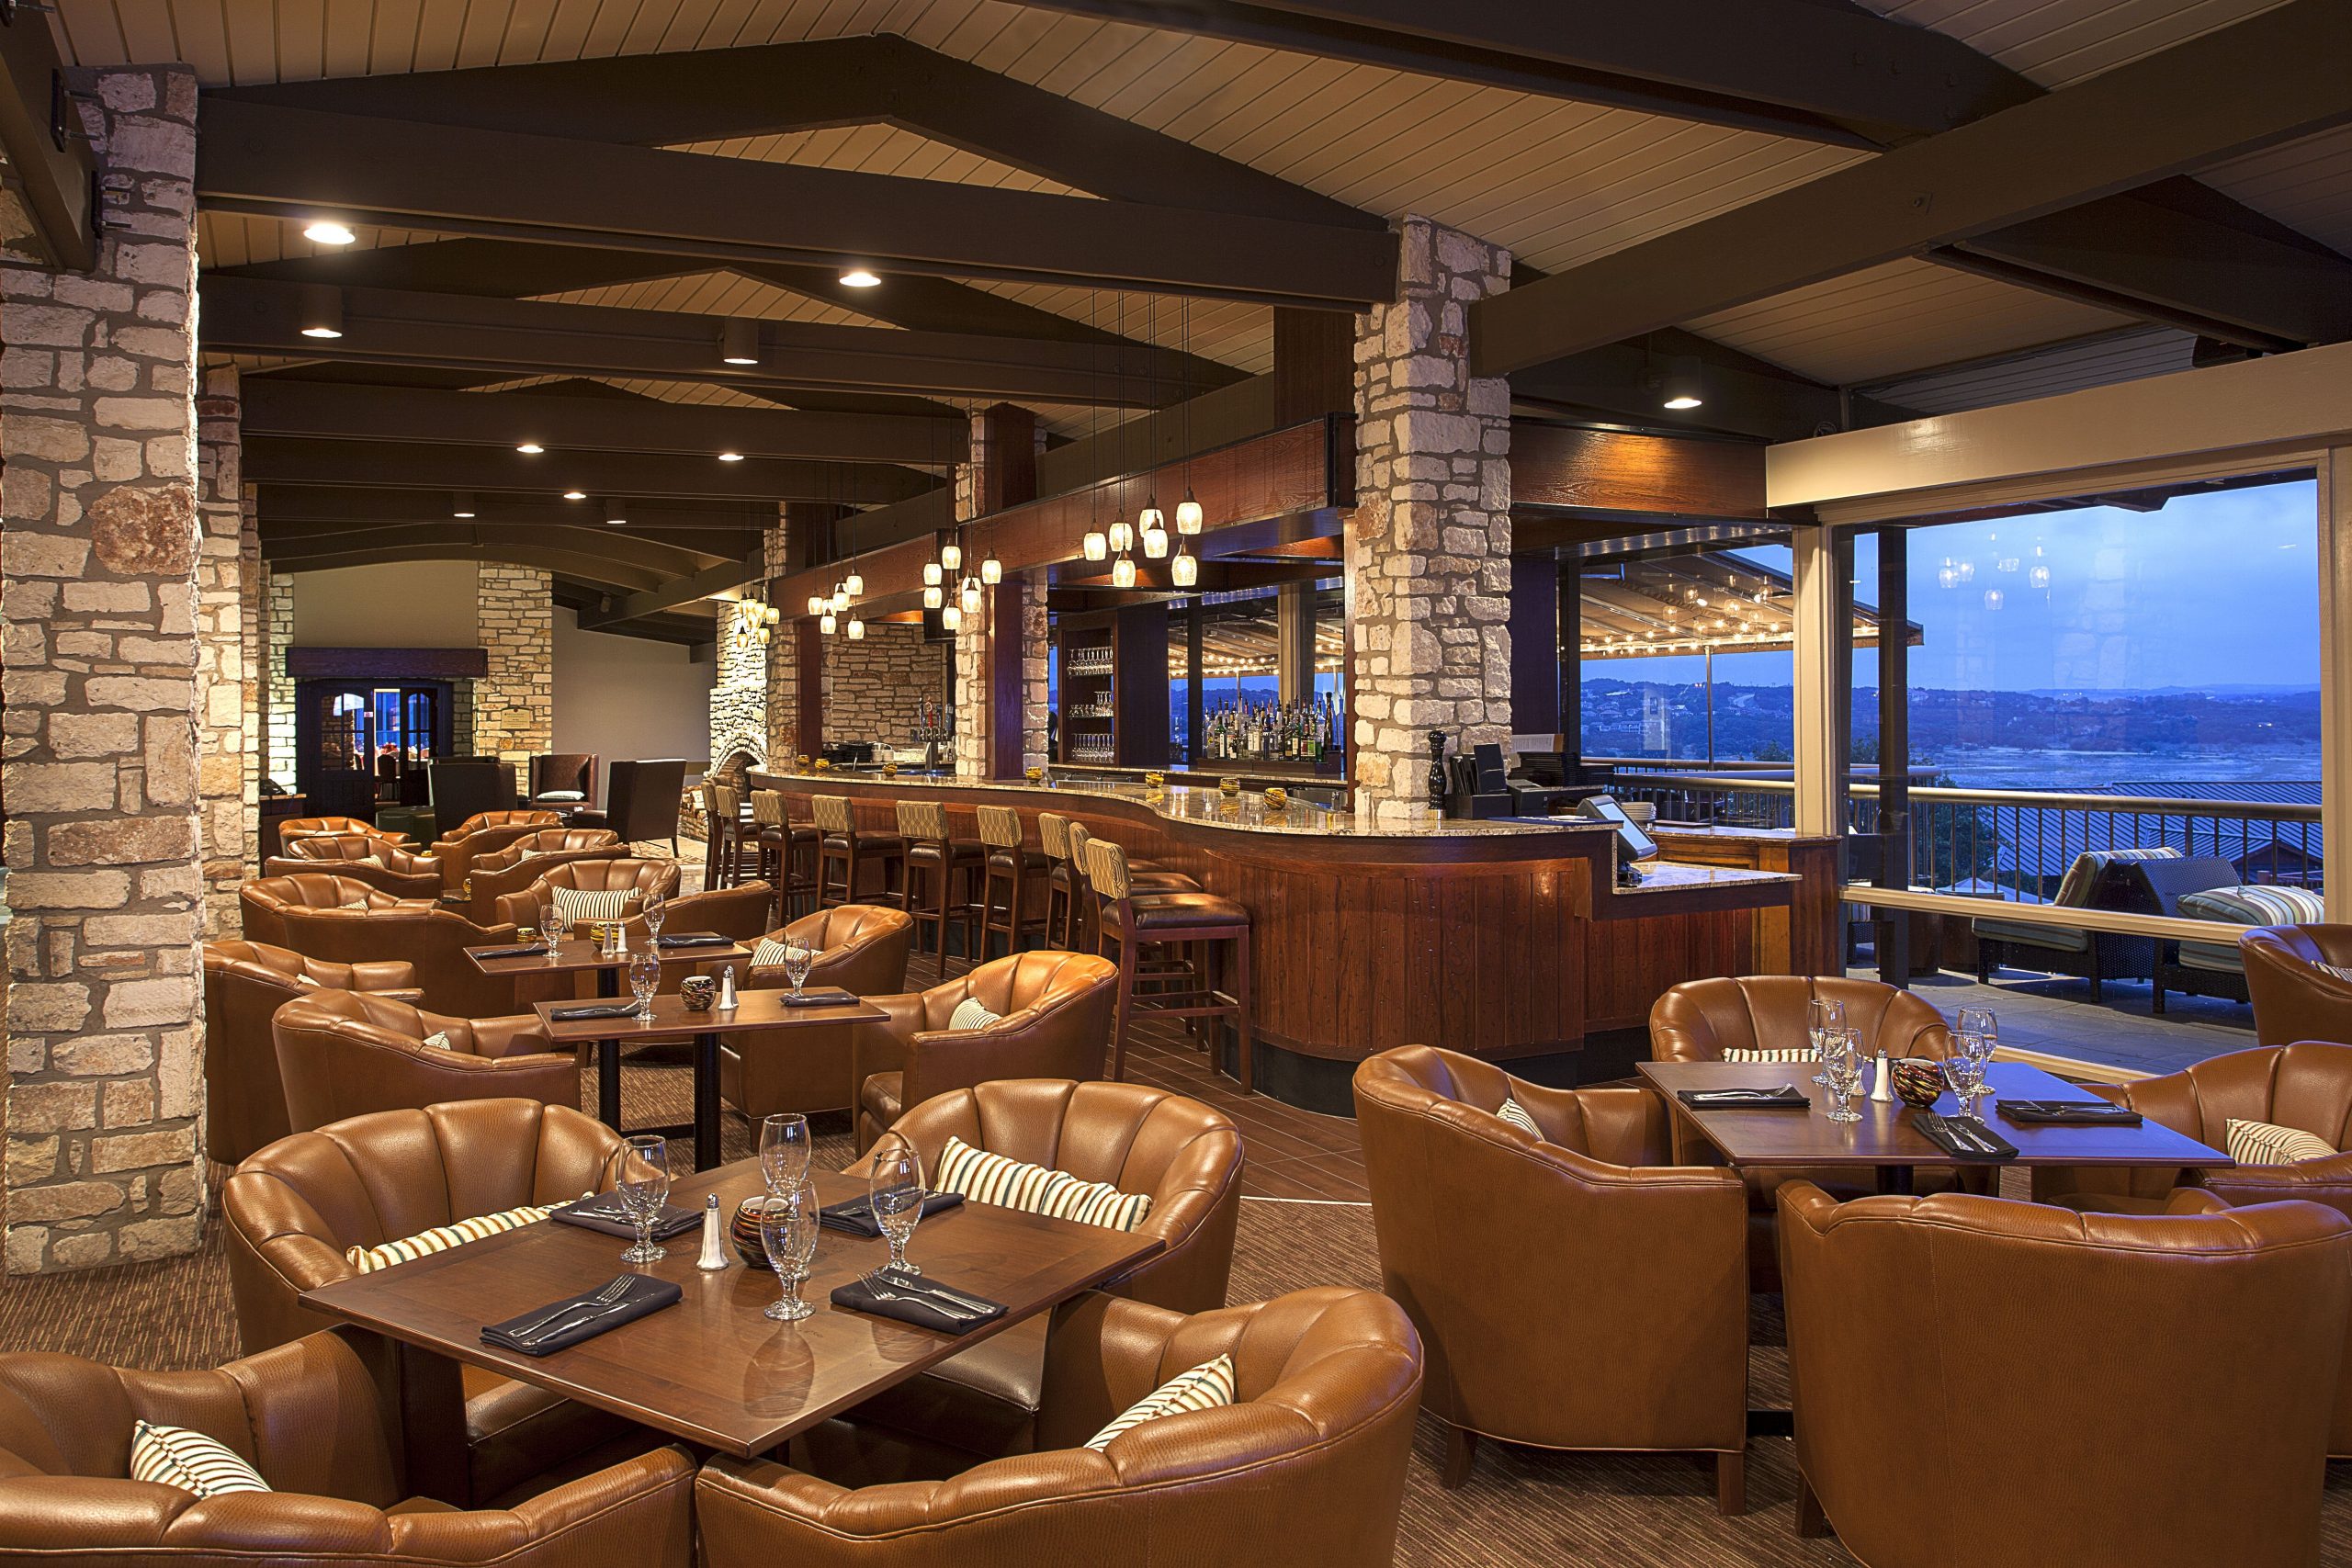 TR Restaurant and Lounge at The Lakeway Resort & Spa